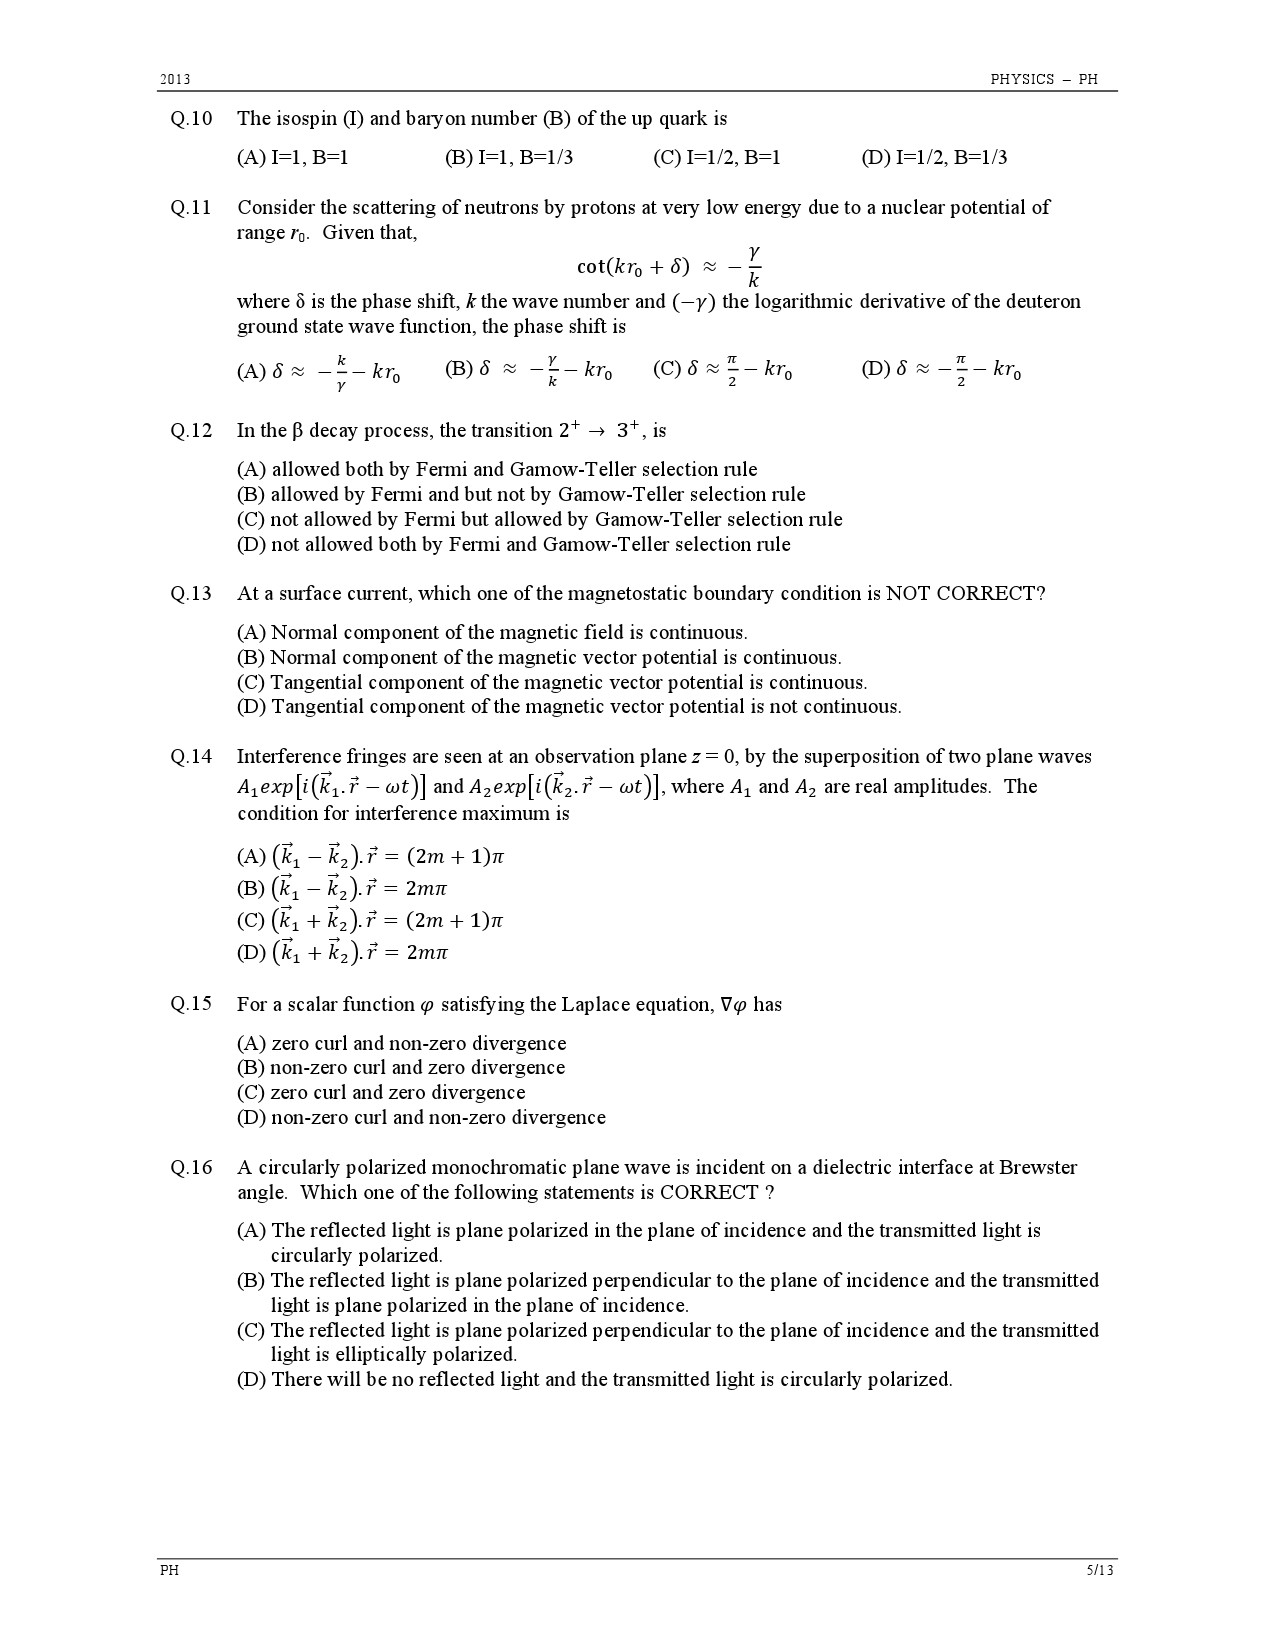 GATE Exam Question Paper 2013 Physics 5